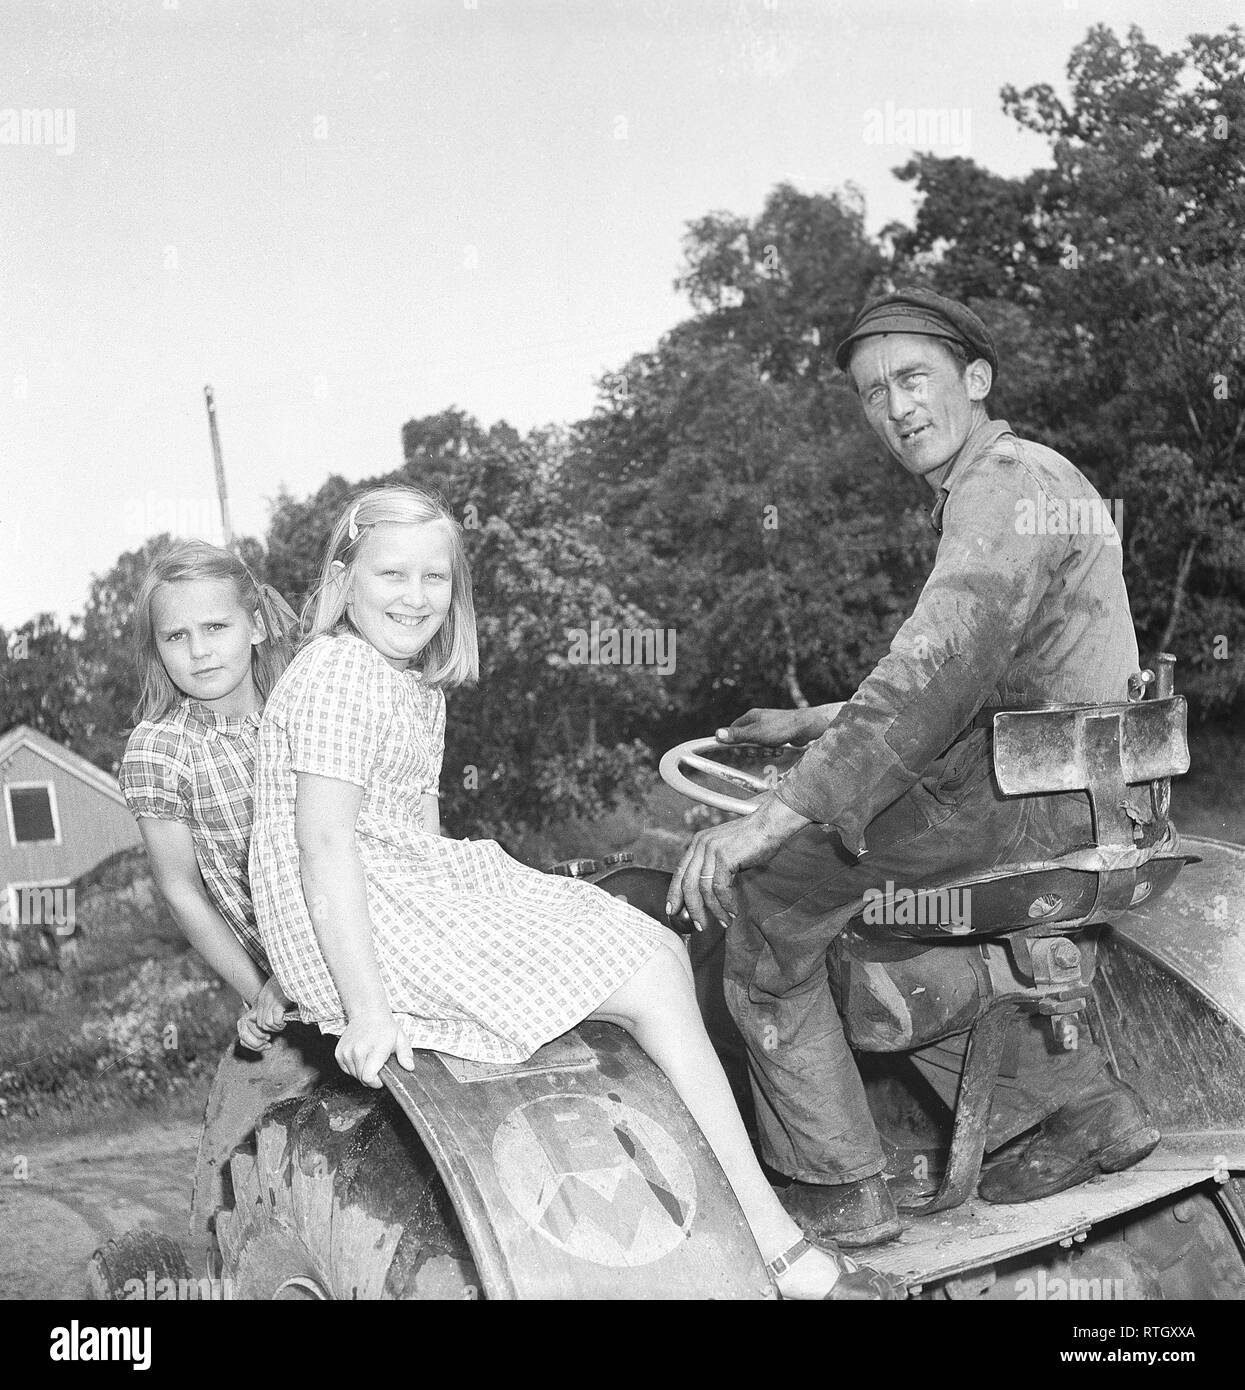 Summer in the 1940s. Two girls in summer dresses are enjoying the summer day in the country. Perhaps on a summer holiday in the countryside where they enjoy riding on the tractor.  Photo Kristoffersson. Ref U54-3. Sweden 1946 Stock Photo